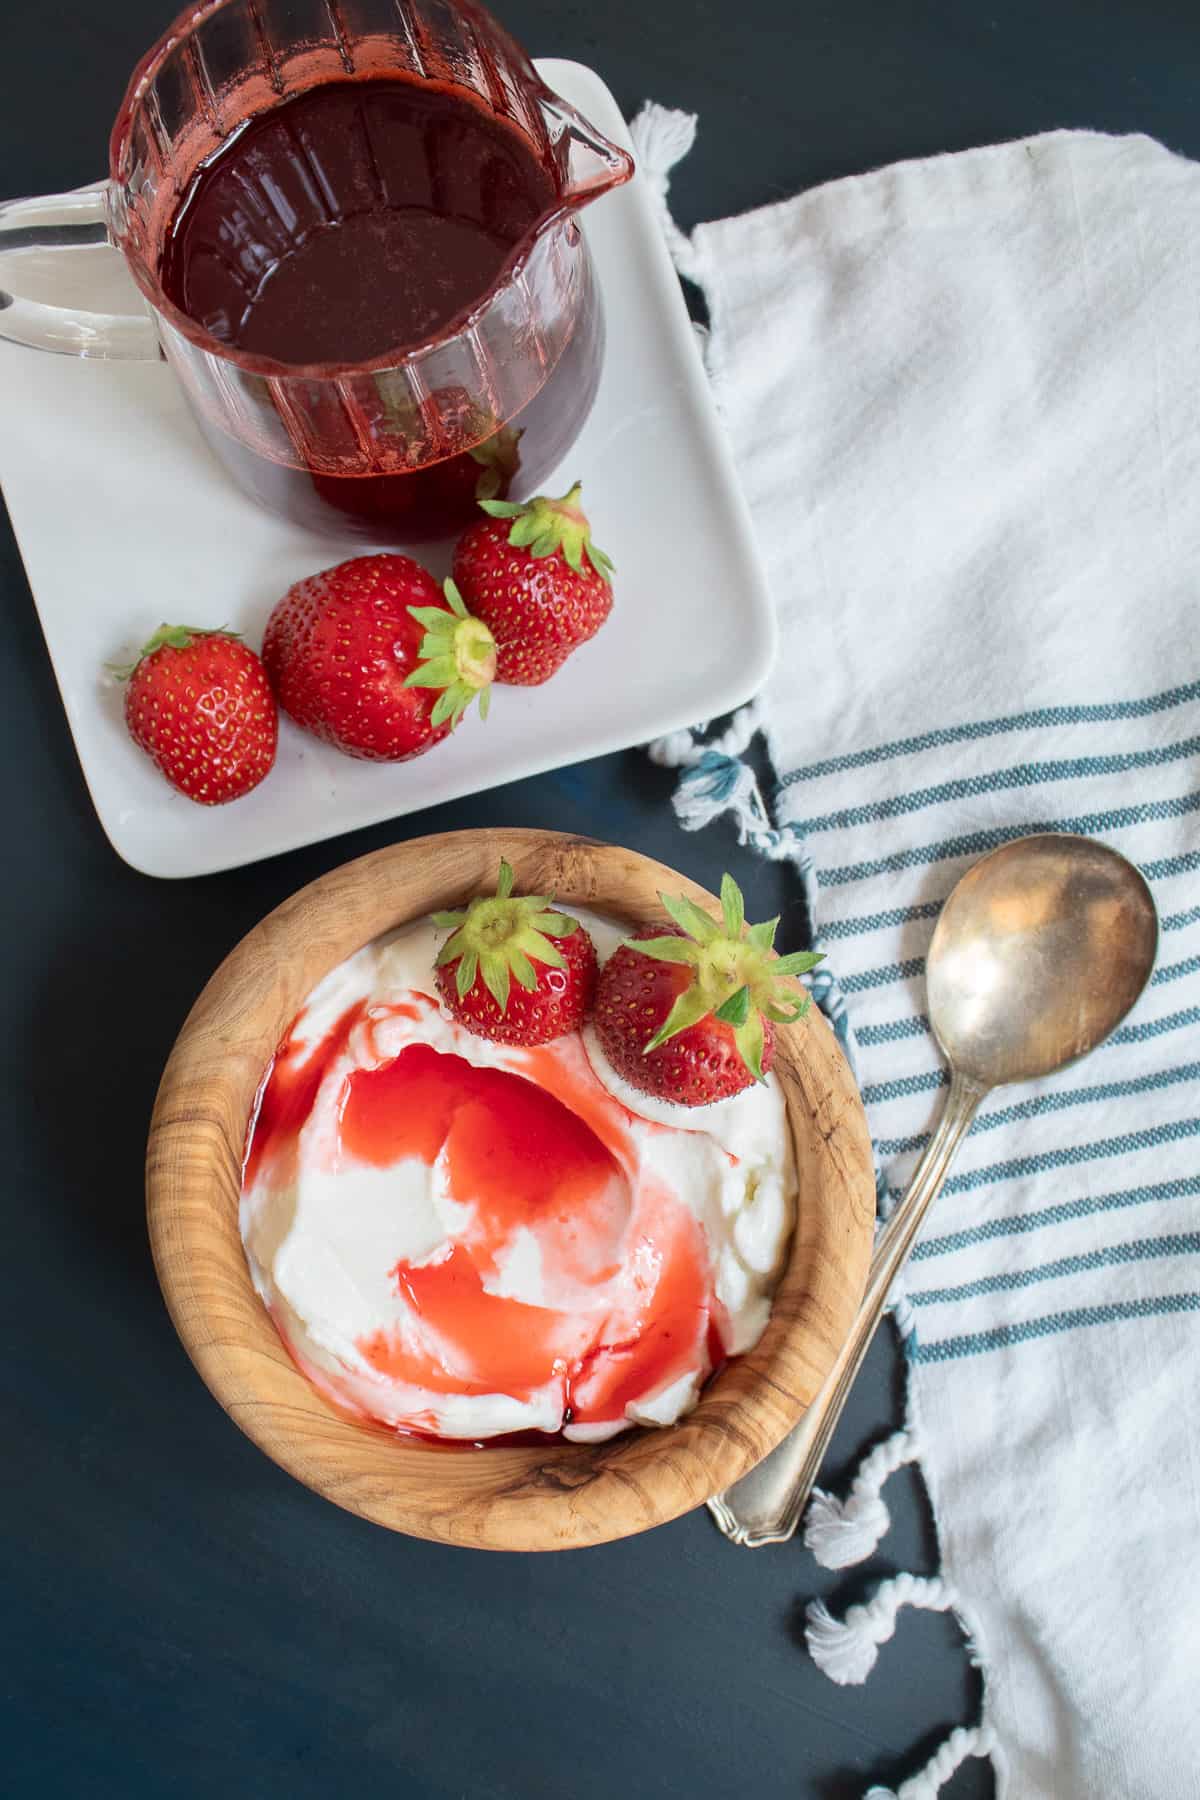 A wood bowl with swirled yogurt, strawberries, and red syrup sits on a blue surface near a pitcher of dark red syrup.